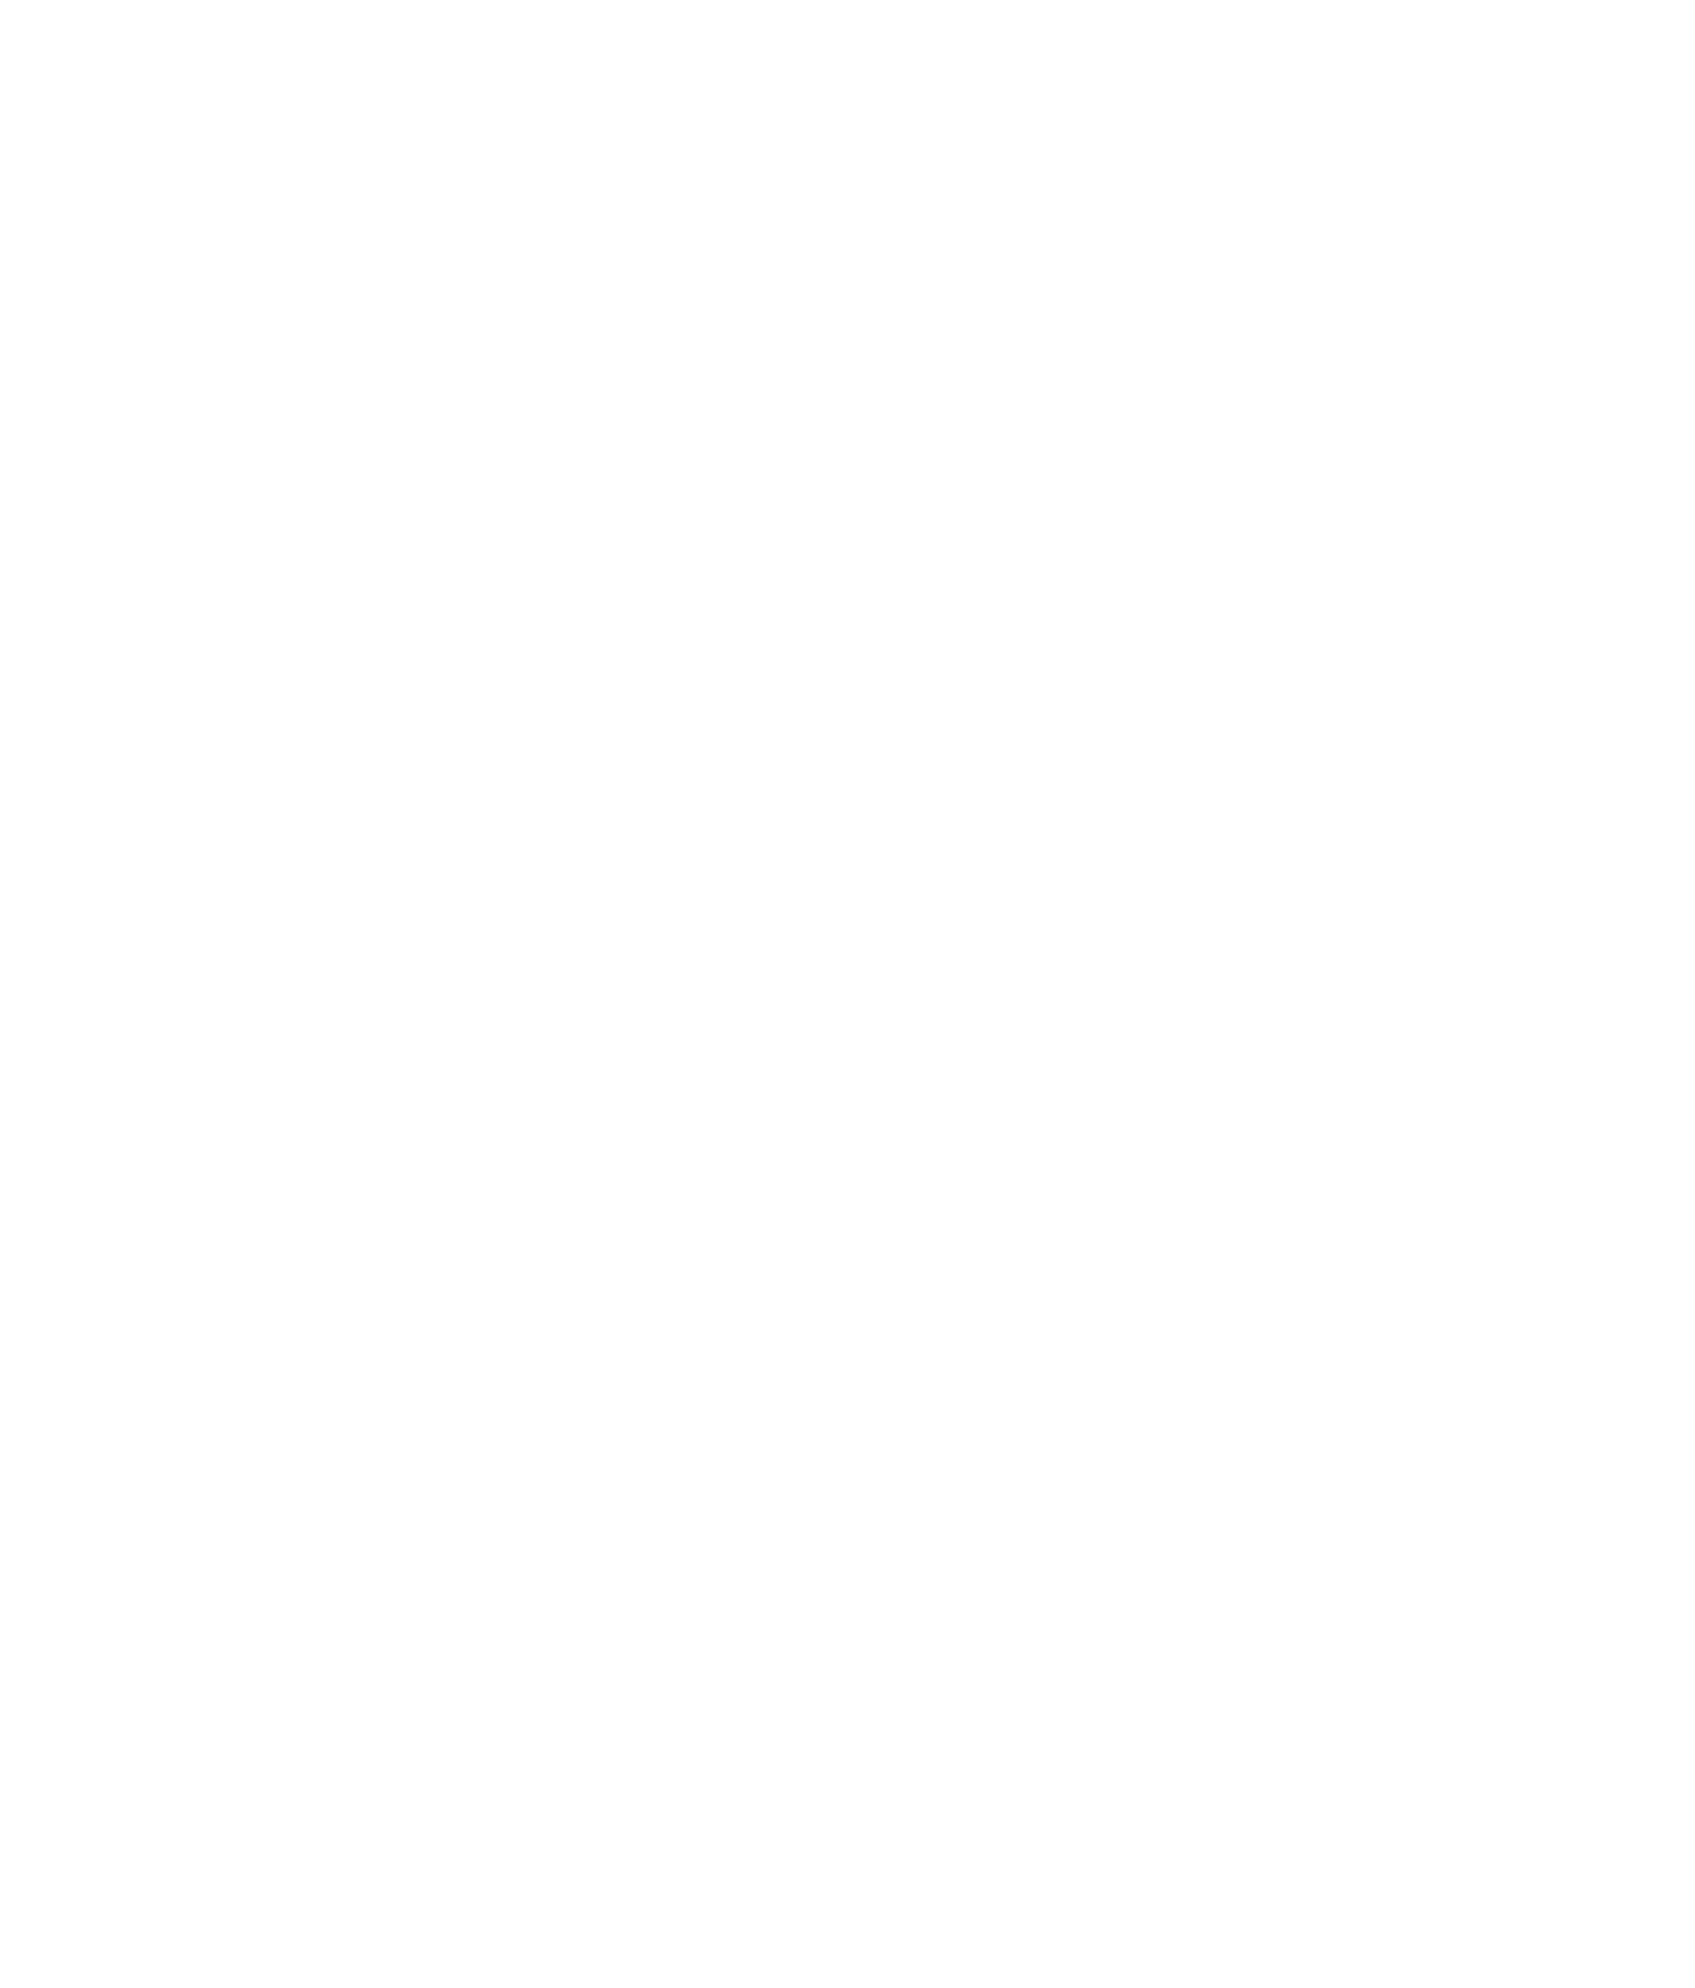 Welcome To Co-op - Restaurant (1695x1988)